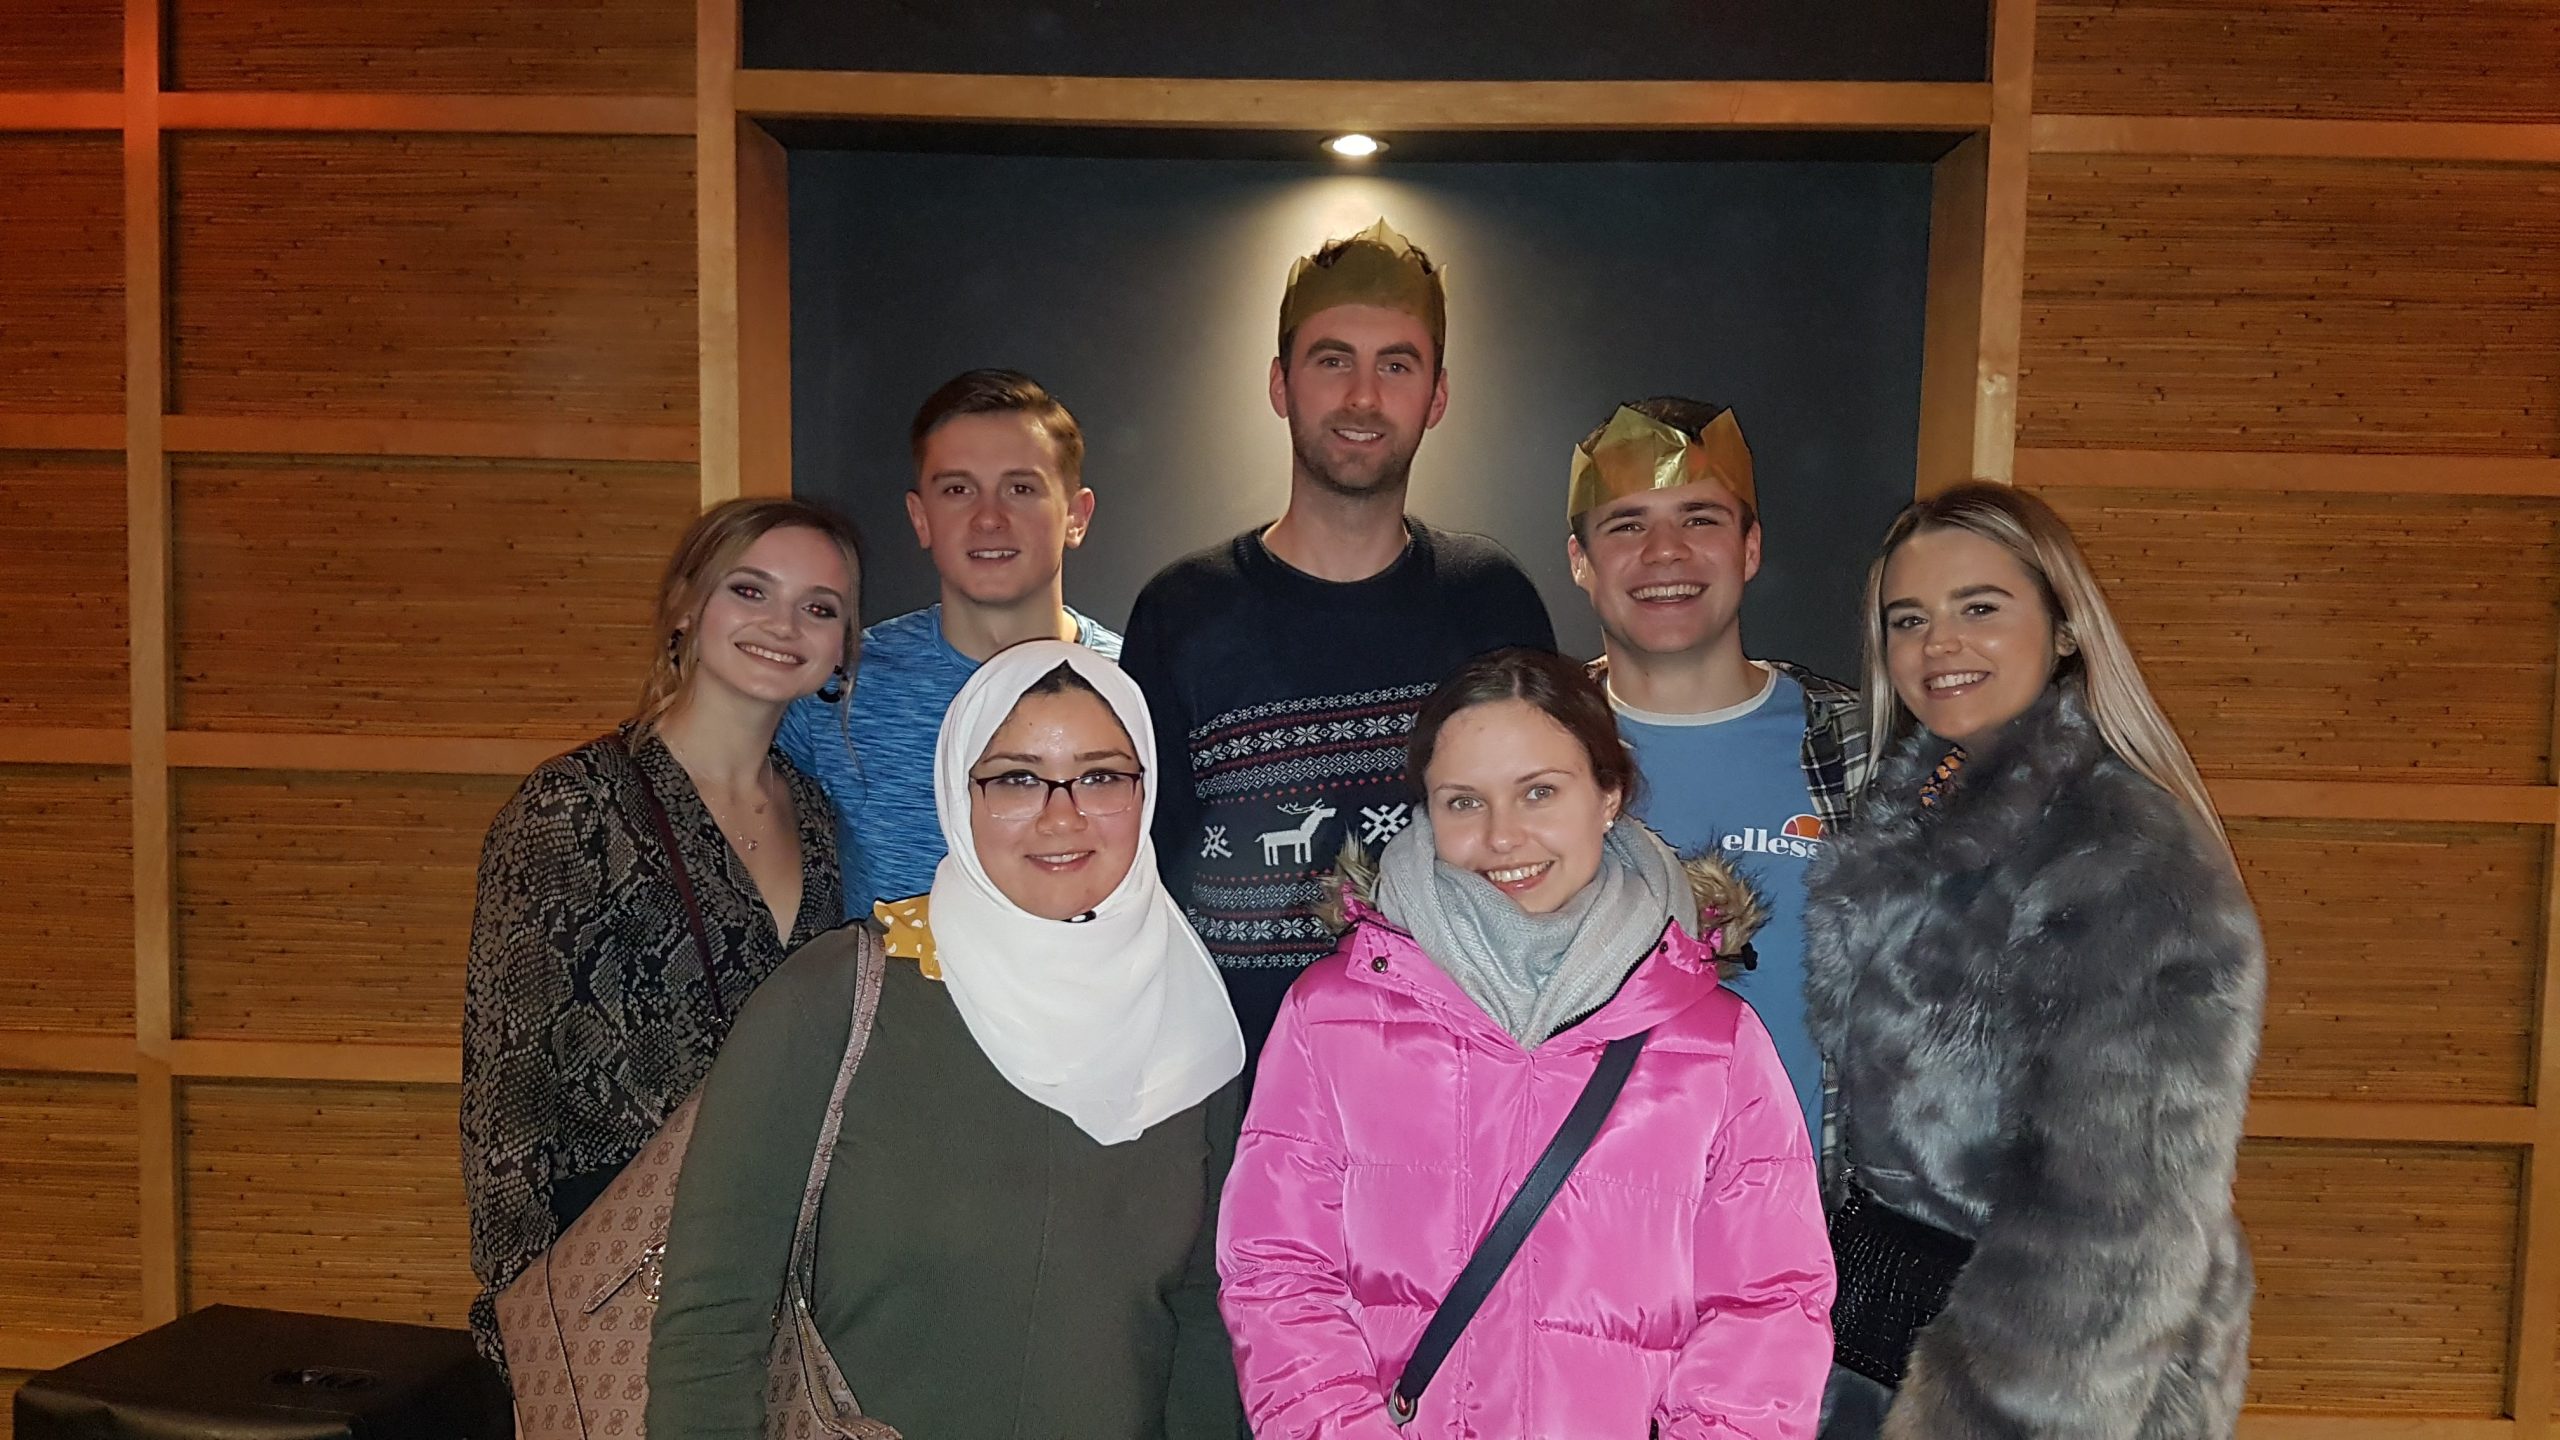 2018 group Christmas meal. Left to right: Harriet, Cameron, Heba, Tom, Edyta, James and Jess